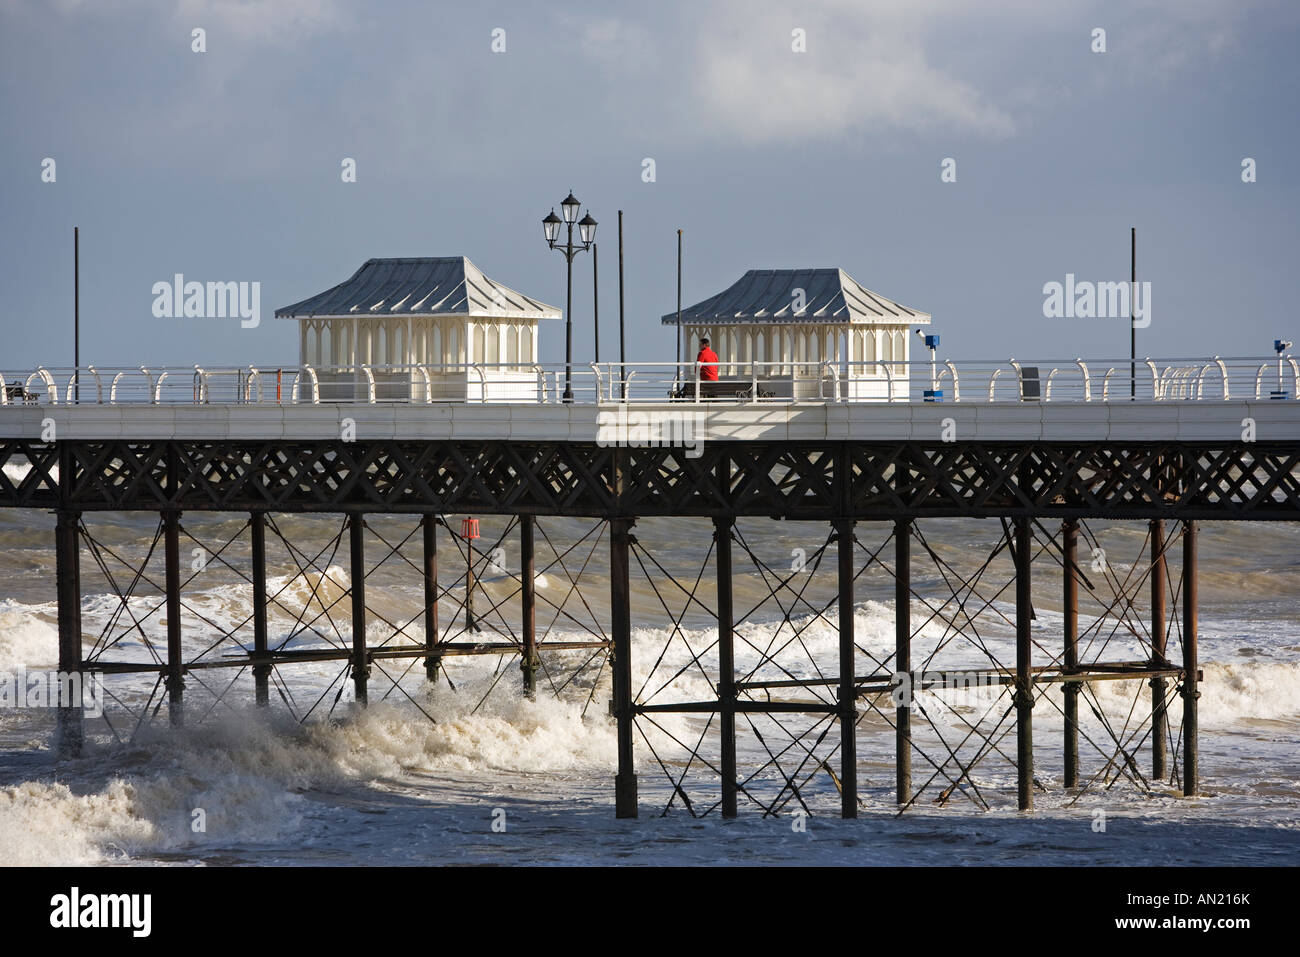 Cromer Pier Cromer Norfolk East Anglia England UK during a high tide and stormy conditions Stock Photo